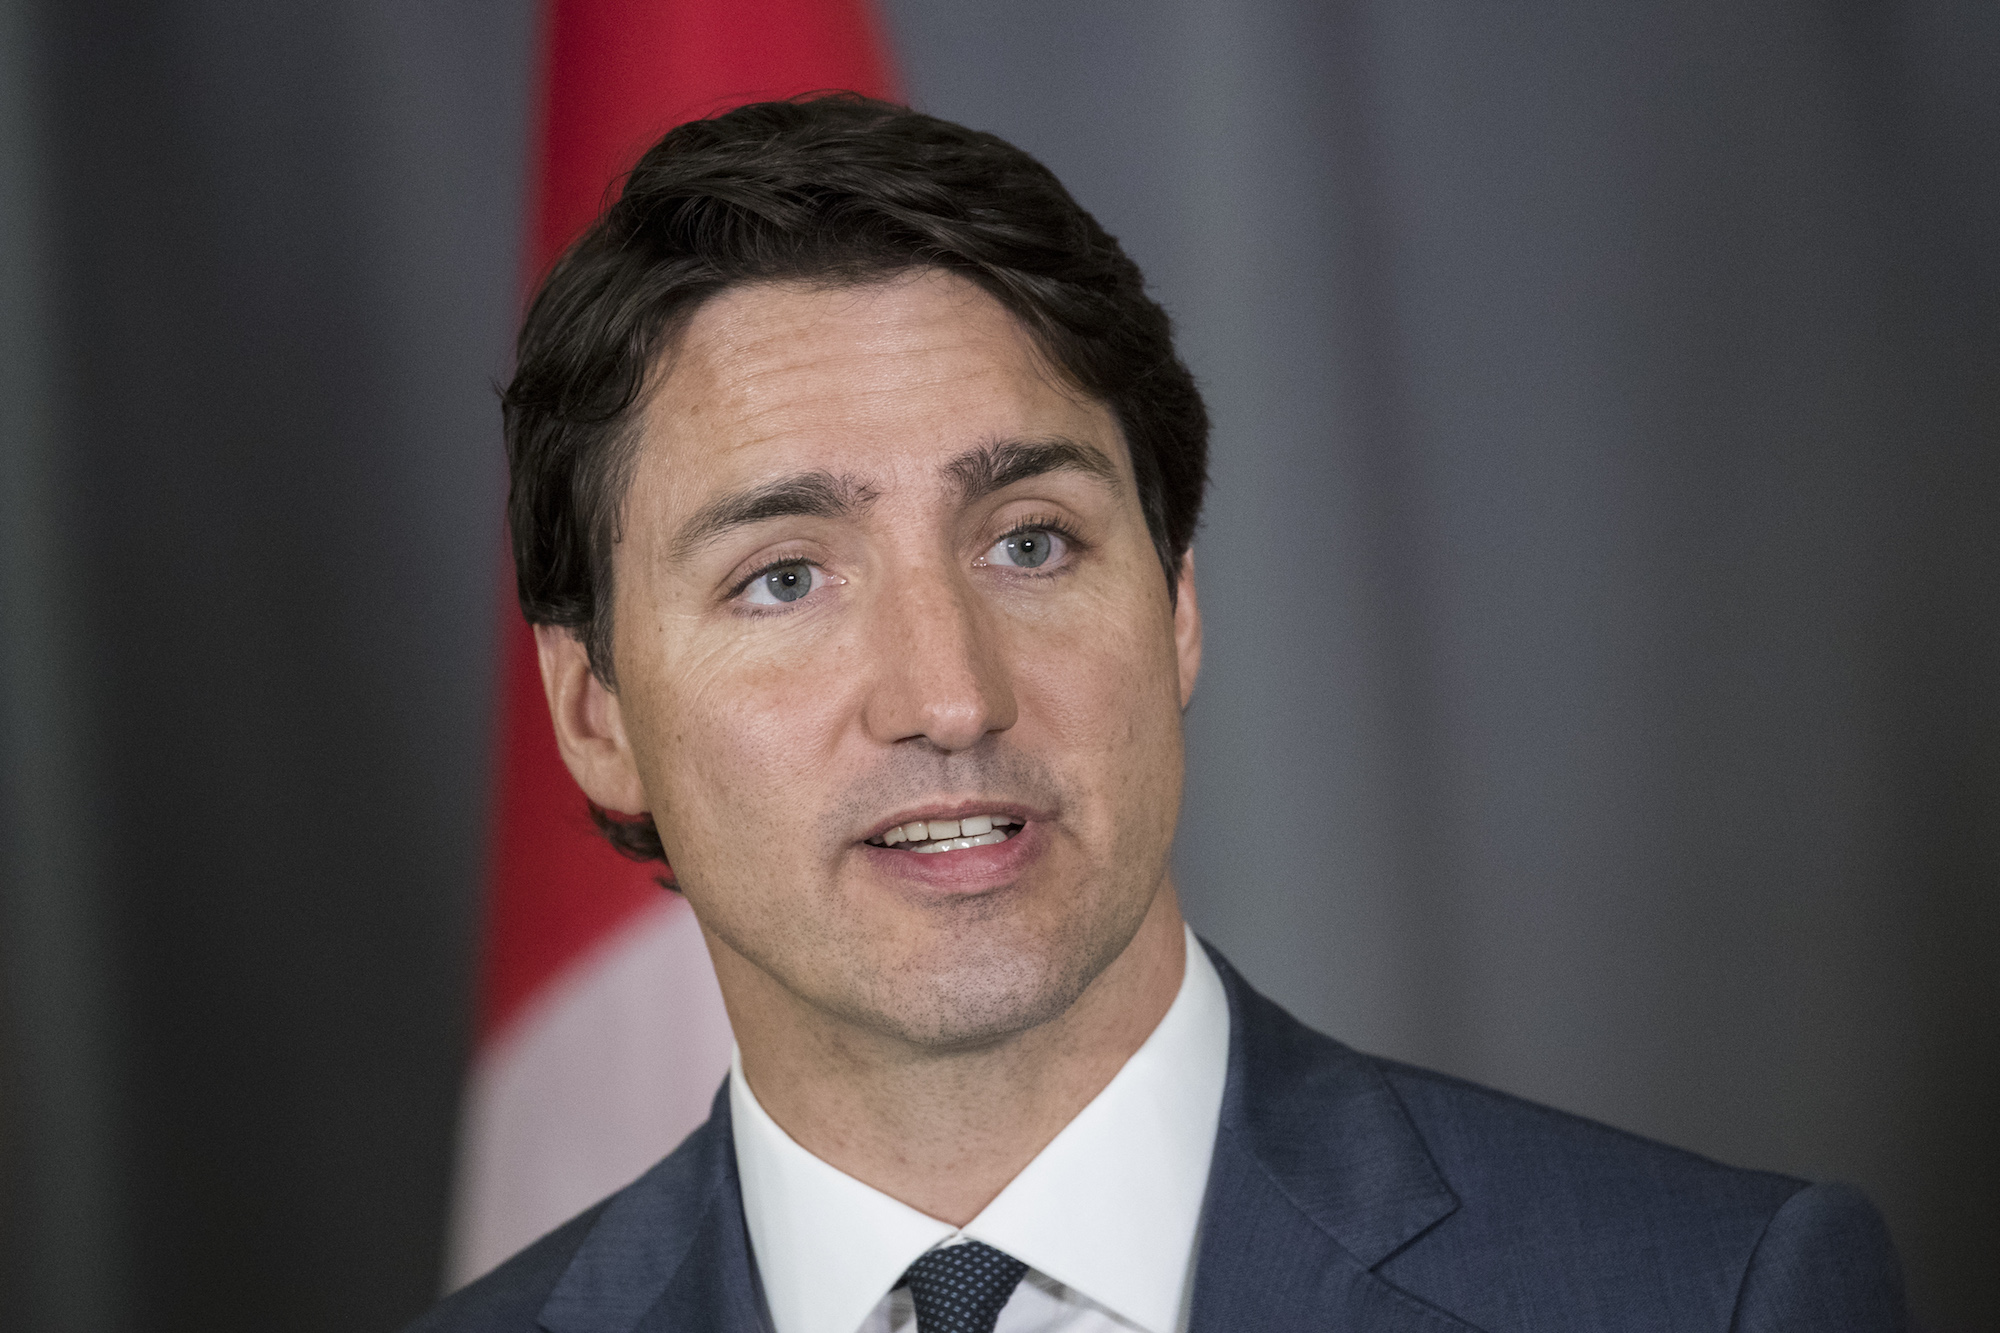 Canadian Prime Minister Justin Trudeau in a file photo. (Drew Angerer/Getty Images)